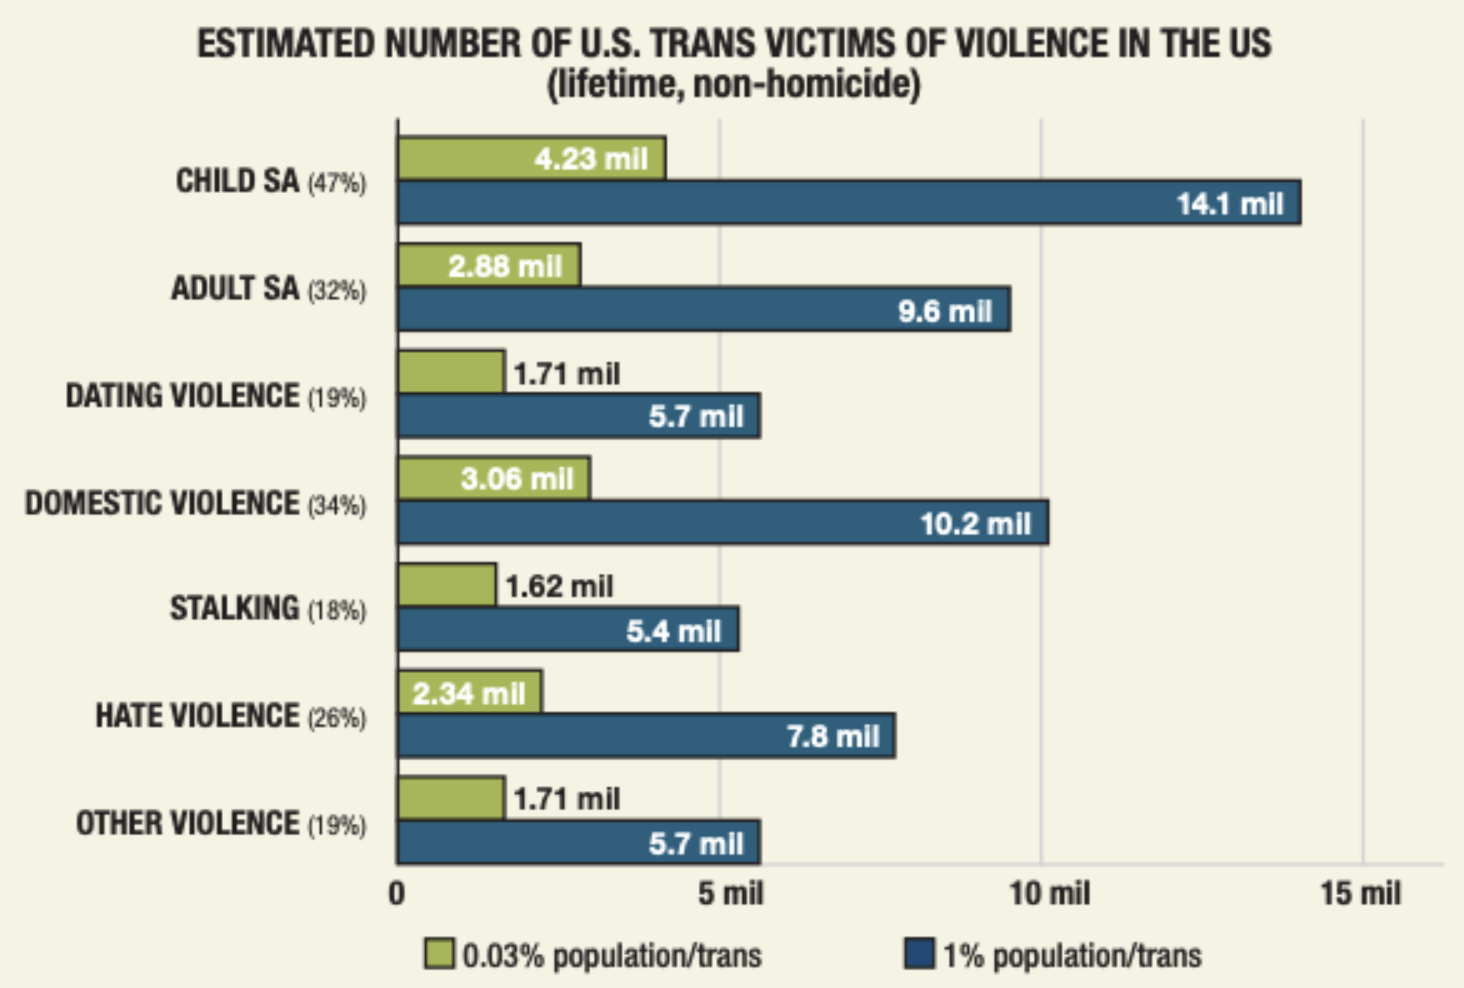 Chart showing estimated number of US trans victims of violence